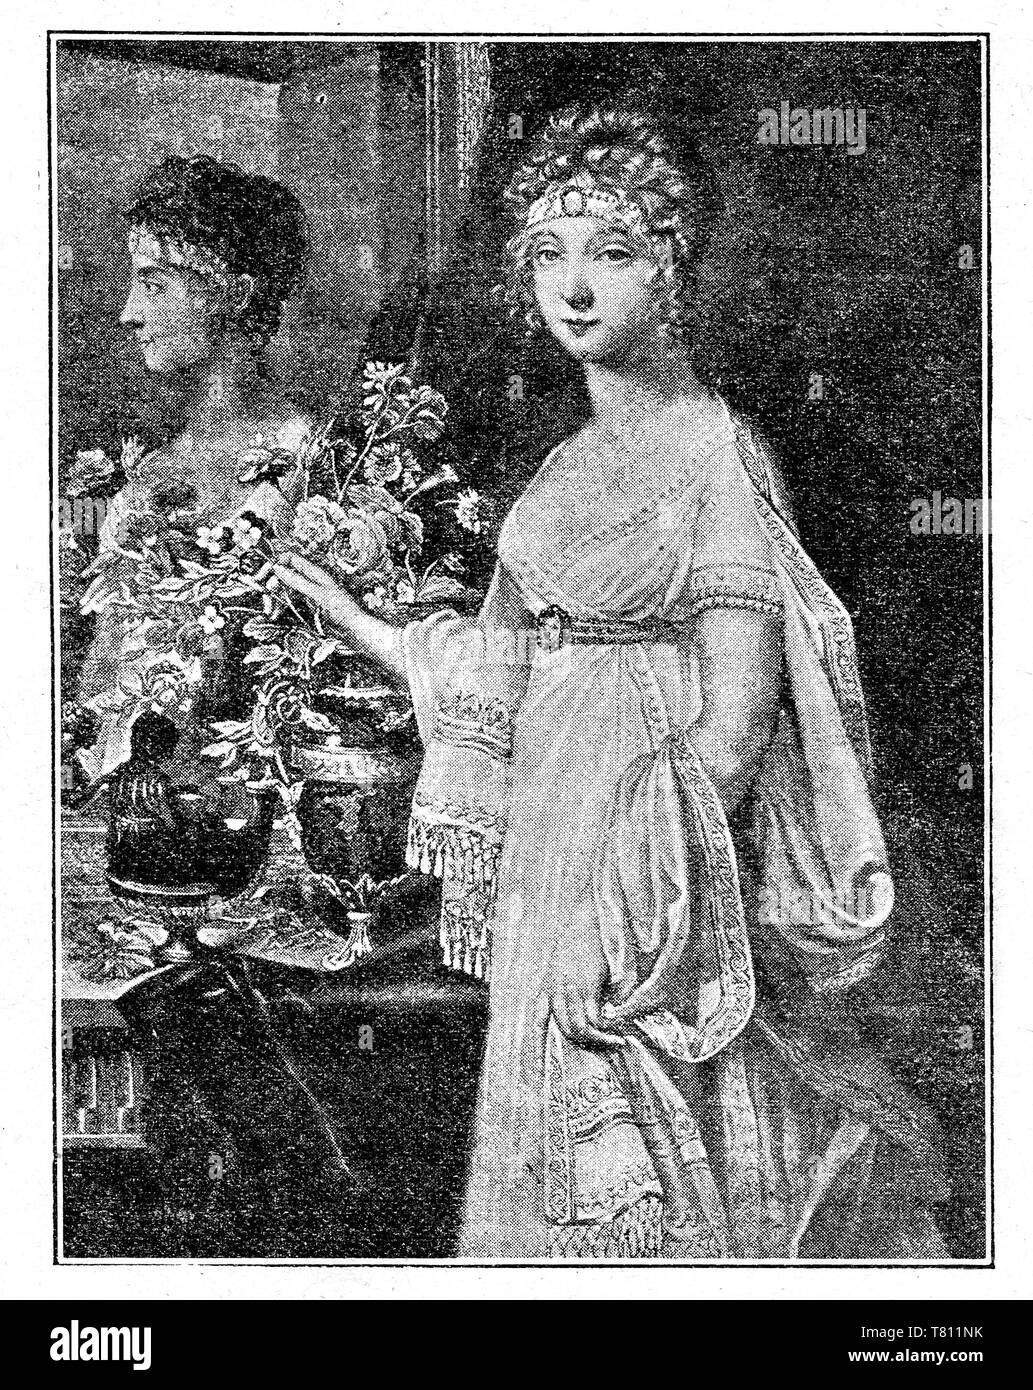 Empress Elizabeth Alekseevna. Digital improved reproduction from Illustrated overview of the life of mankind in the 19th century, 1901 edition, Marx publishing house, St. Petersburg Stock Photo